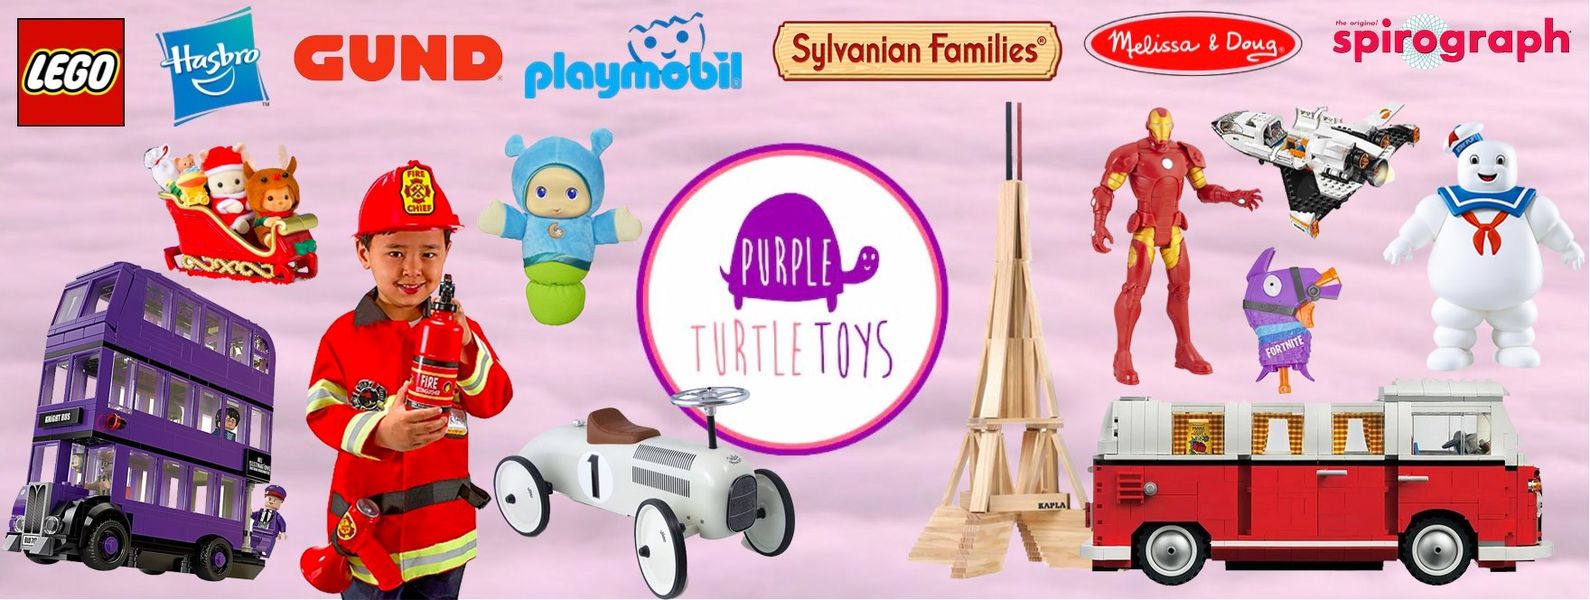 All Purple Turtle Toys Deals & Promotions